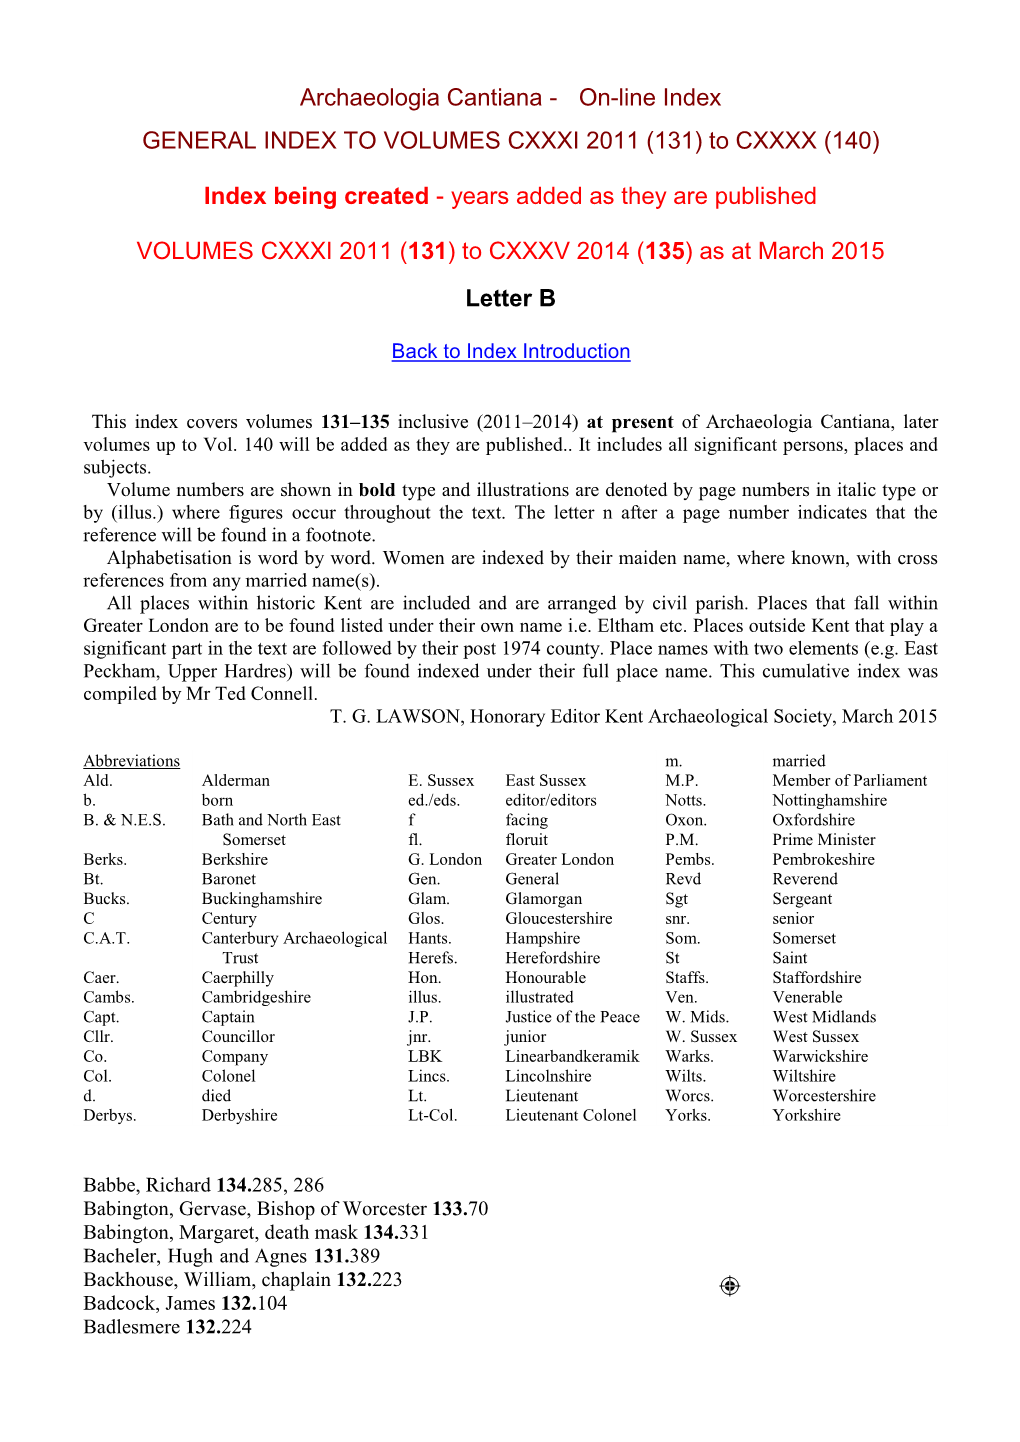 Archaeologia Cantiana - On-Line Index GENERAL INDEX to VOLUMES CXXXI 2011 (131) to CXXXX (140)